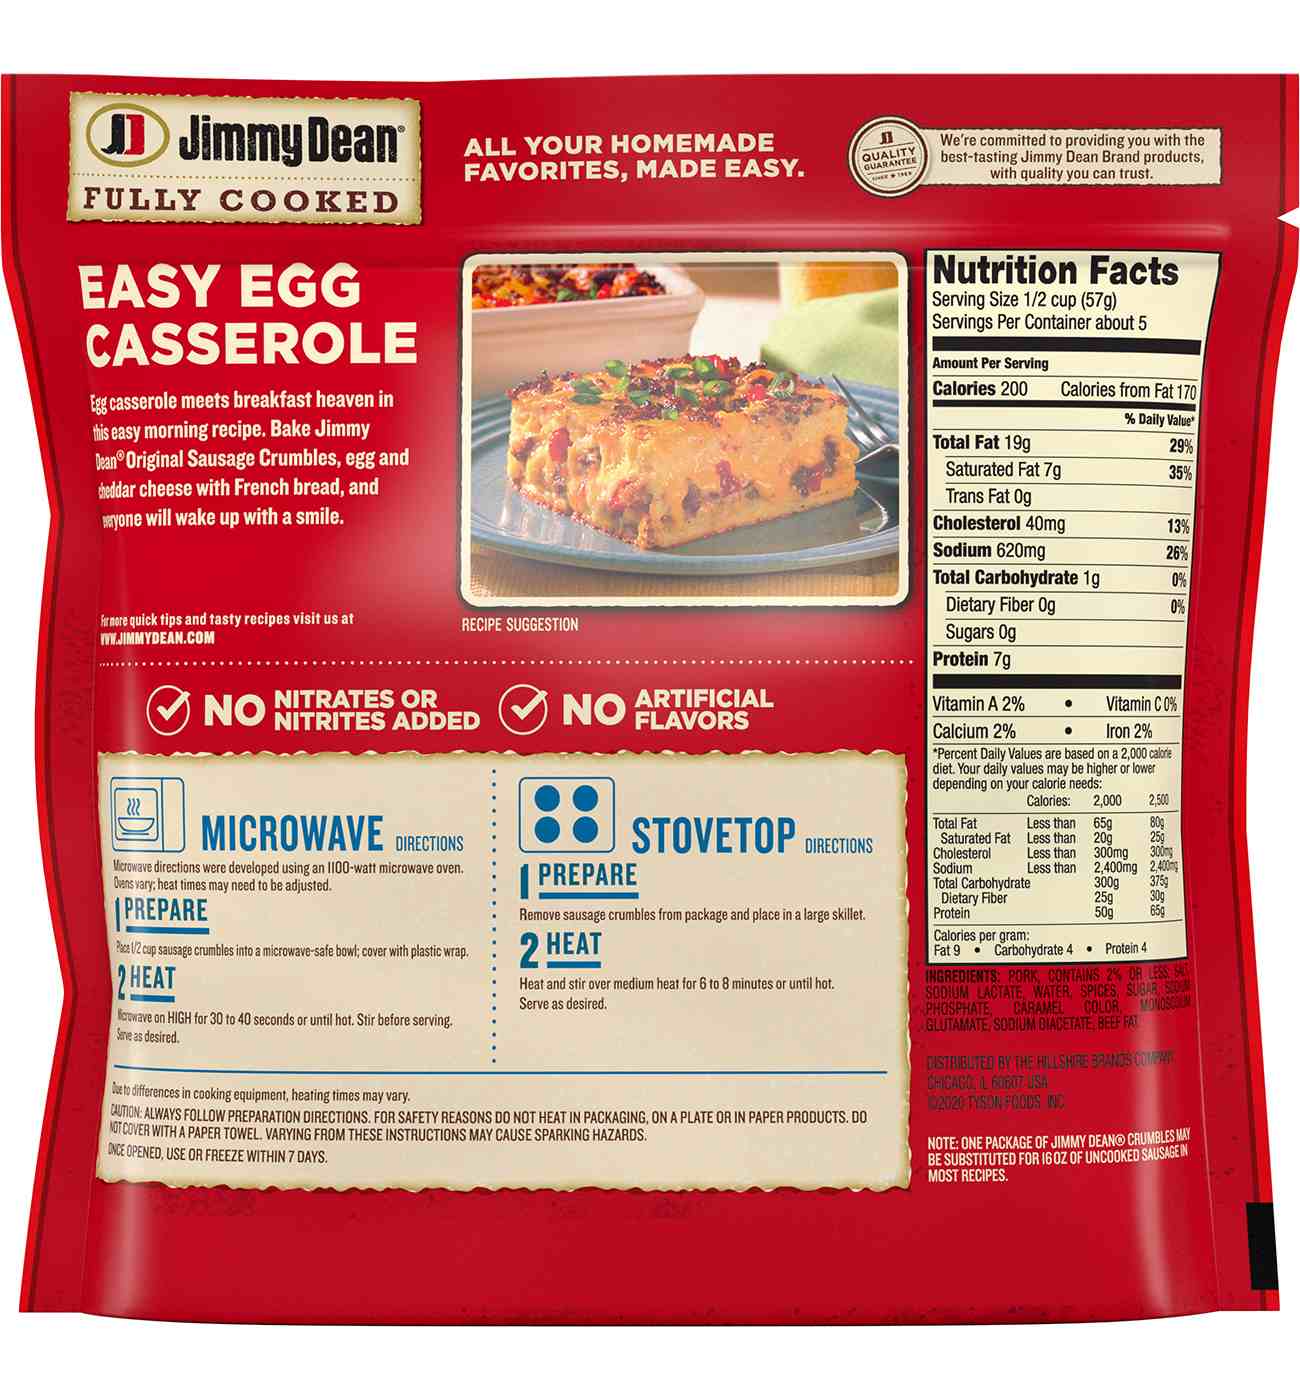 Jimmy Dean Fully Cooked Pork Sausage Crumbles - Original; image 2 of 2